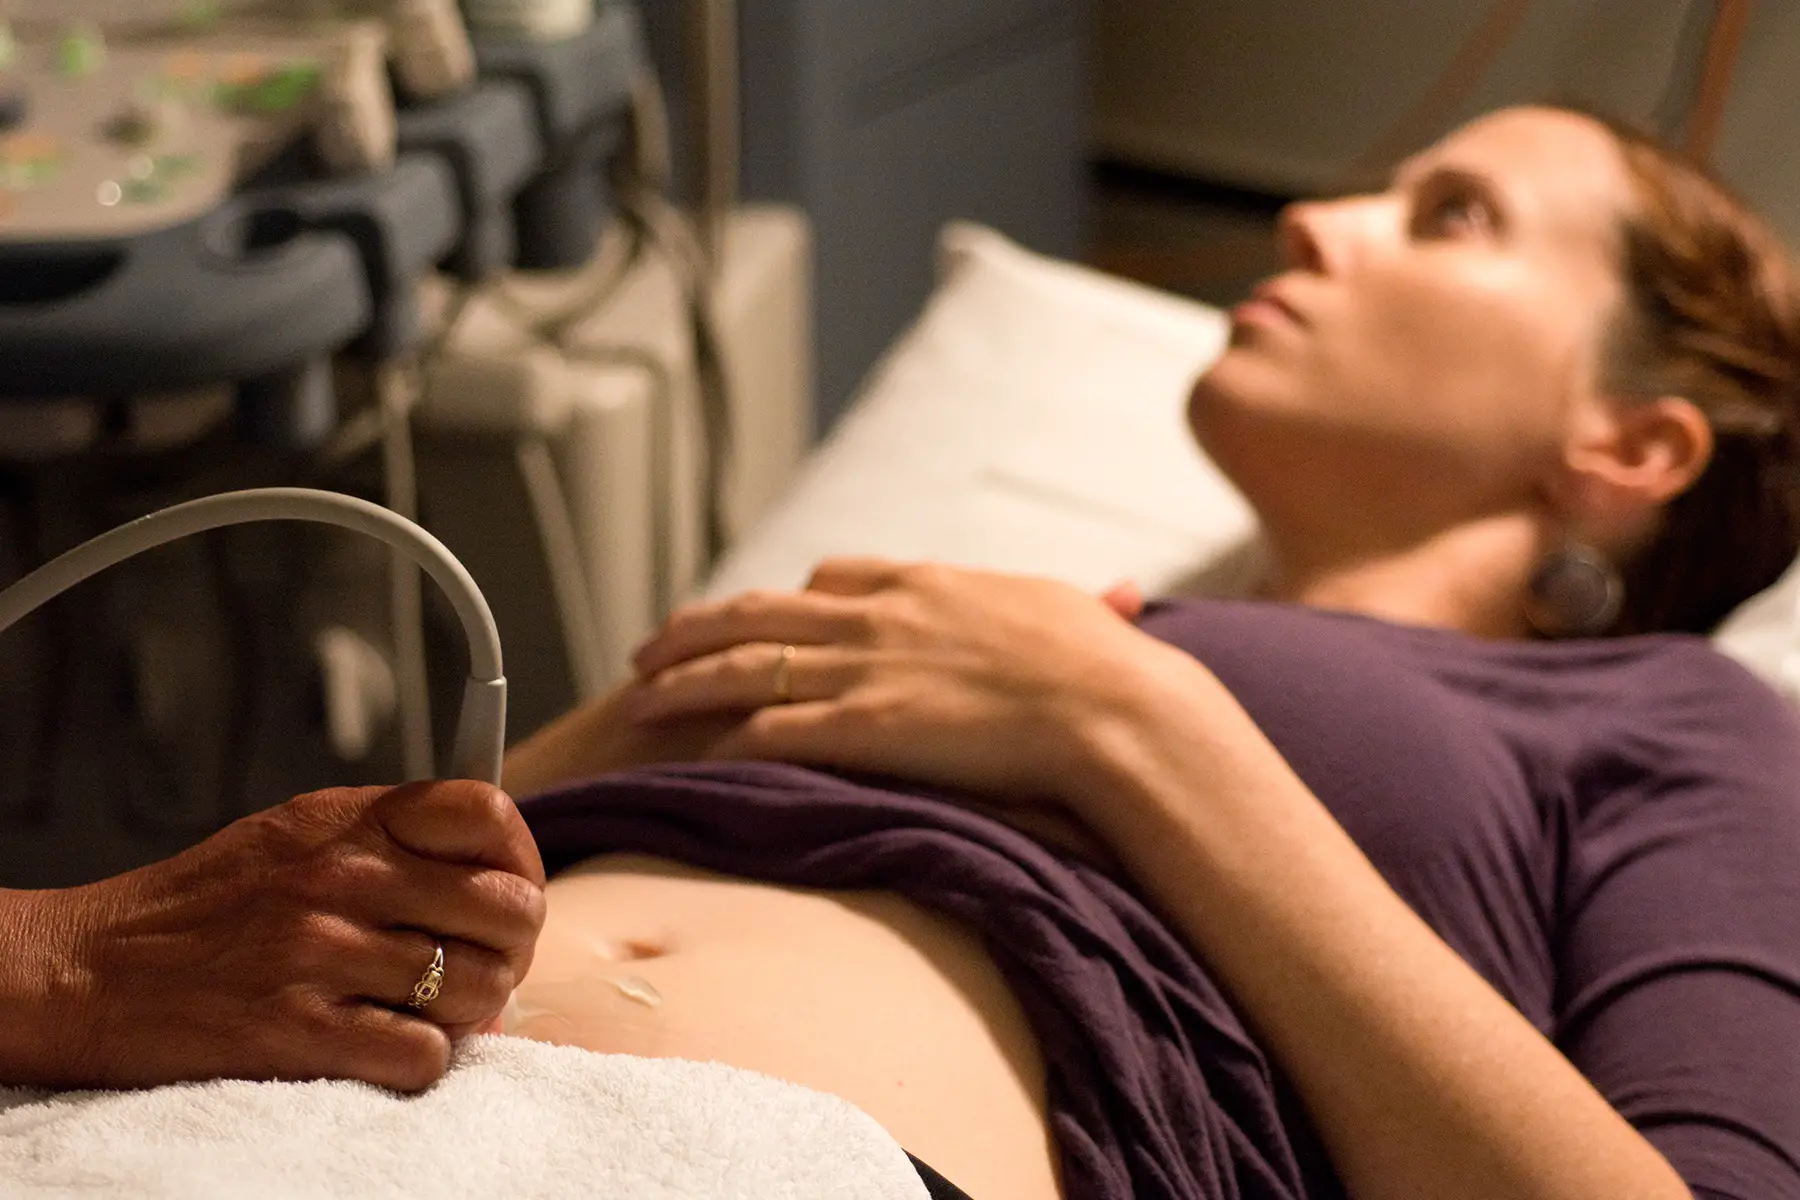 Pregnant woman having an ultrasound performed